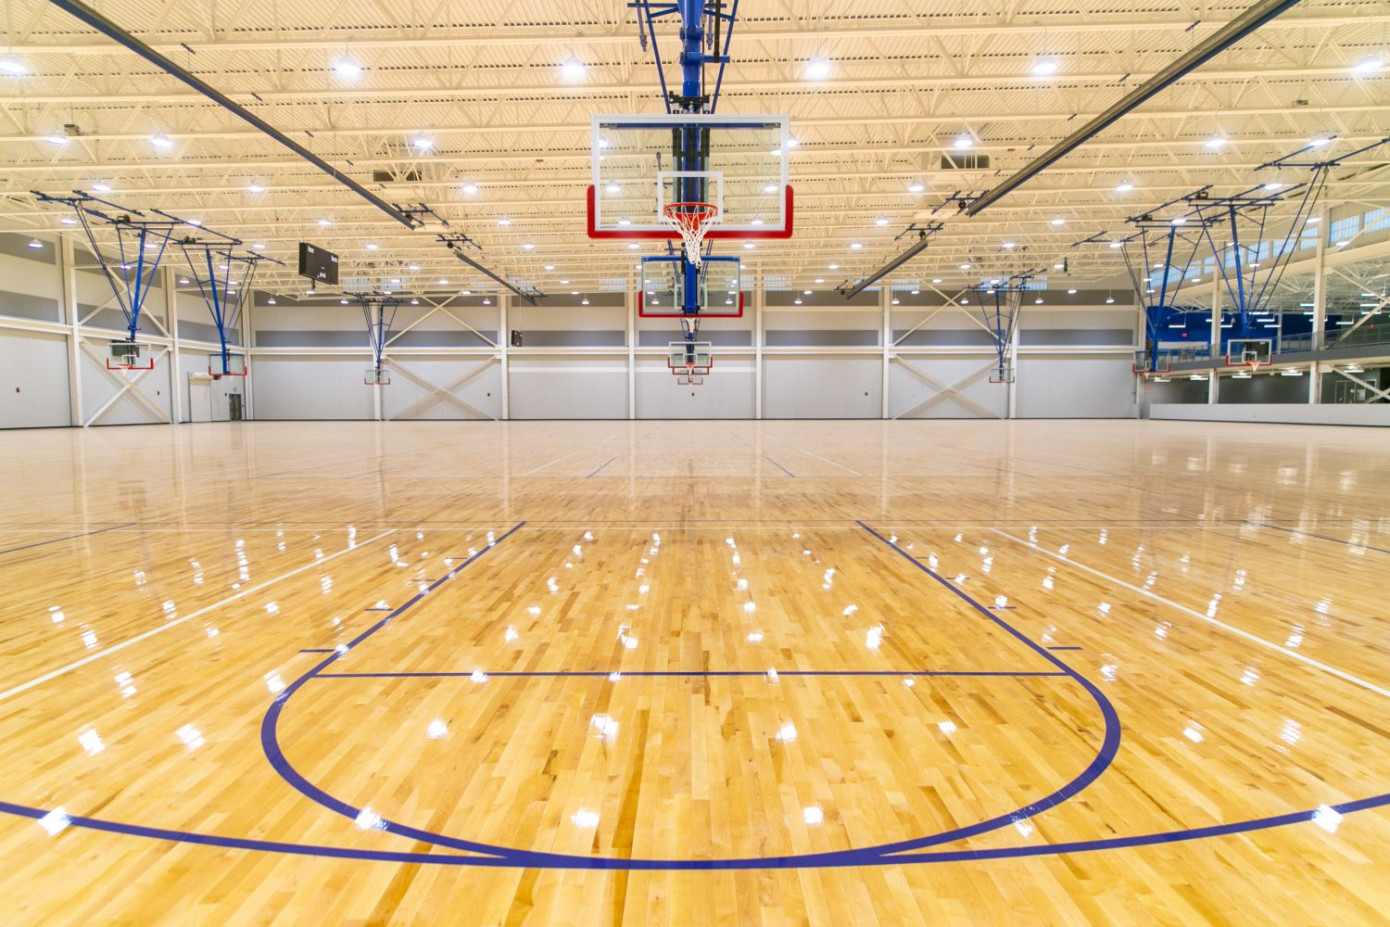 L2 Capital Acquires Hardwood Sports Flooring Manufacturer Robbins Surfaces